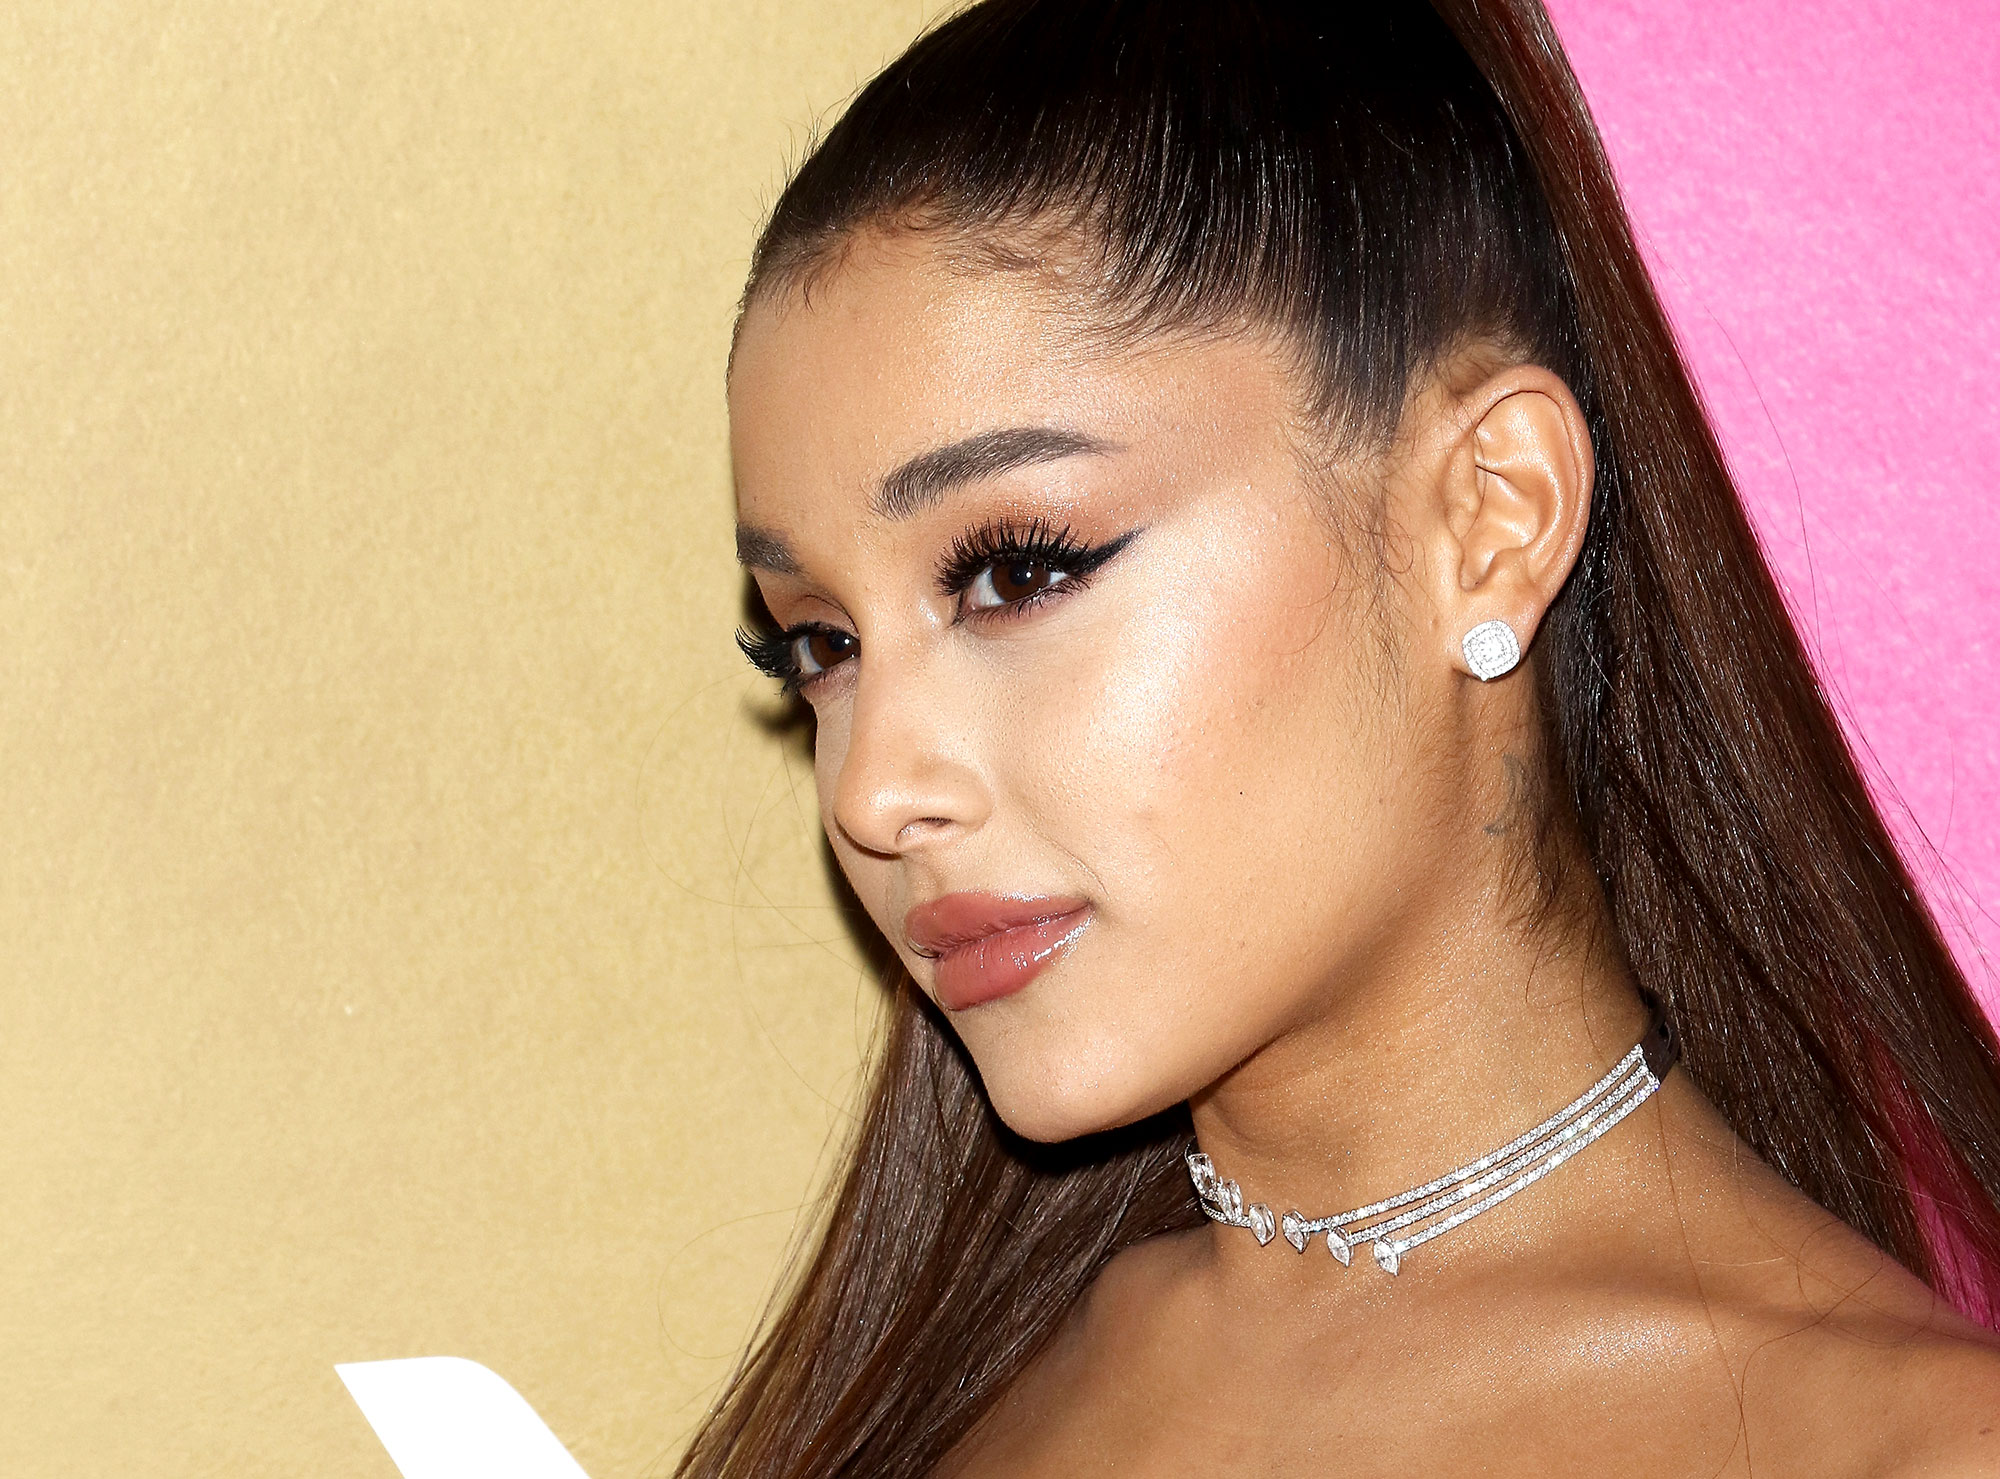 Ariana Grande Used Carter Beauty Liner For Break Up Music Video